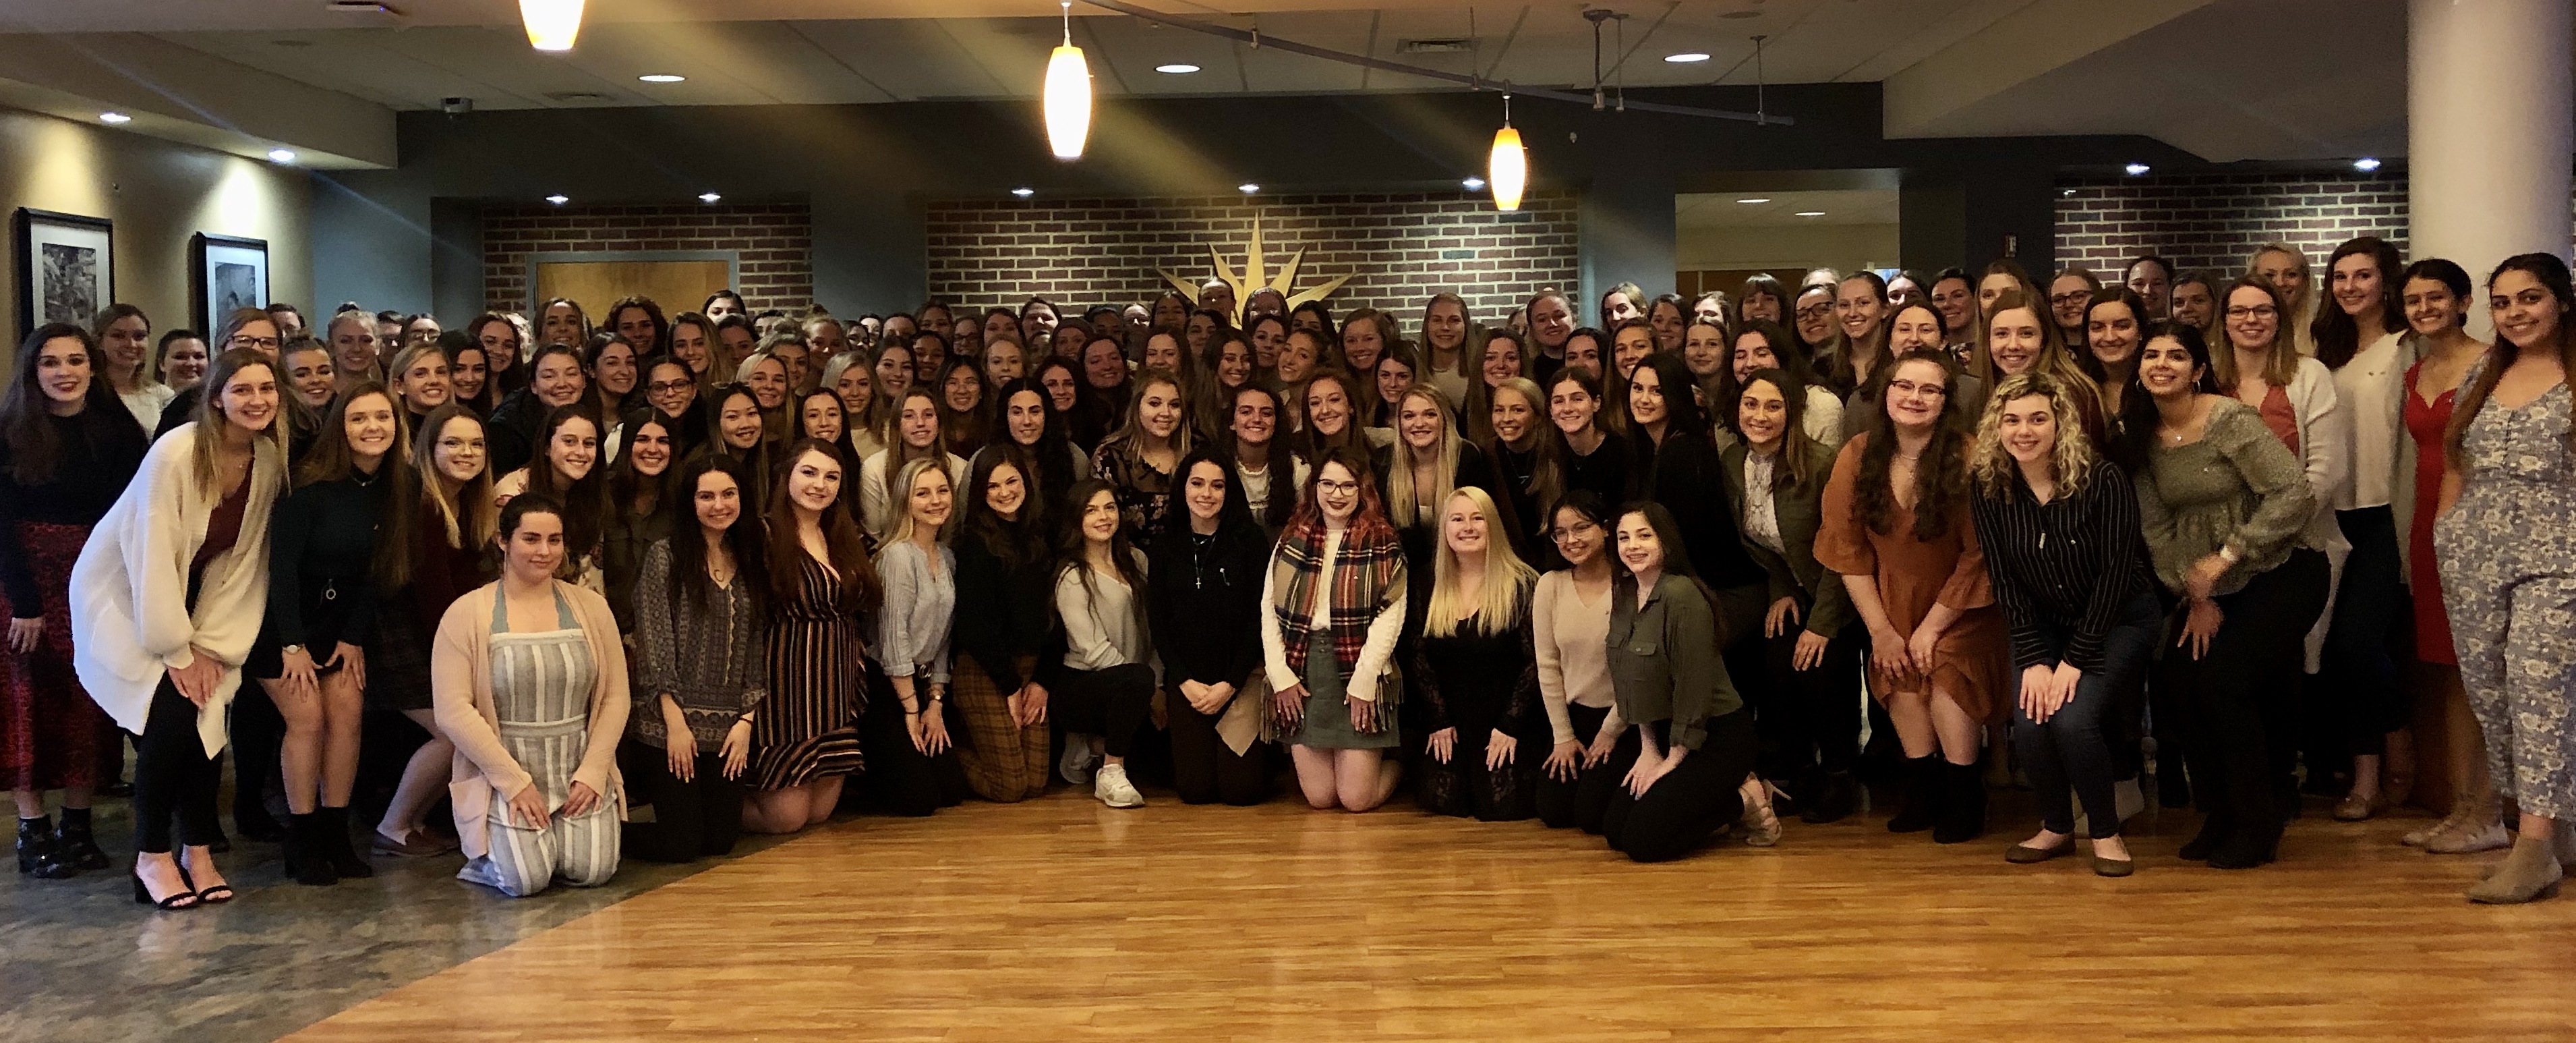 Group photo of sorority women during Panhellenic Badge Day